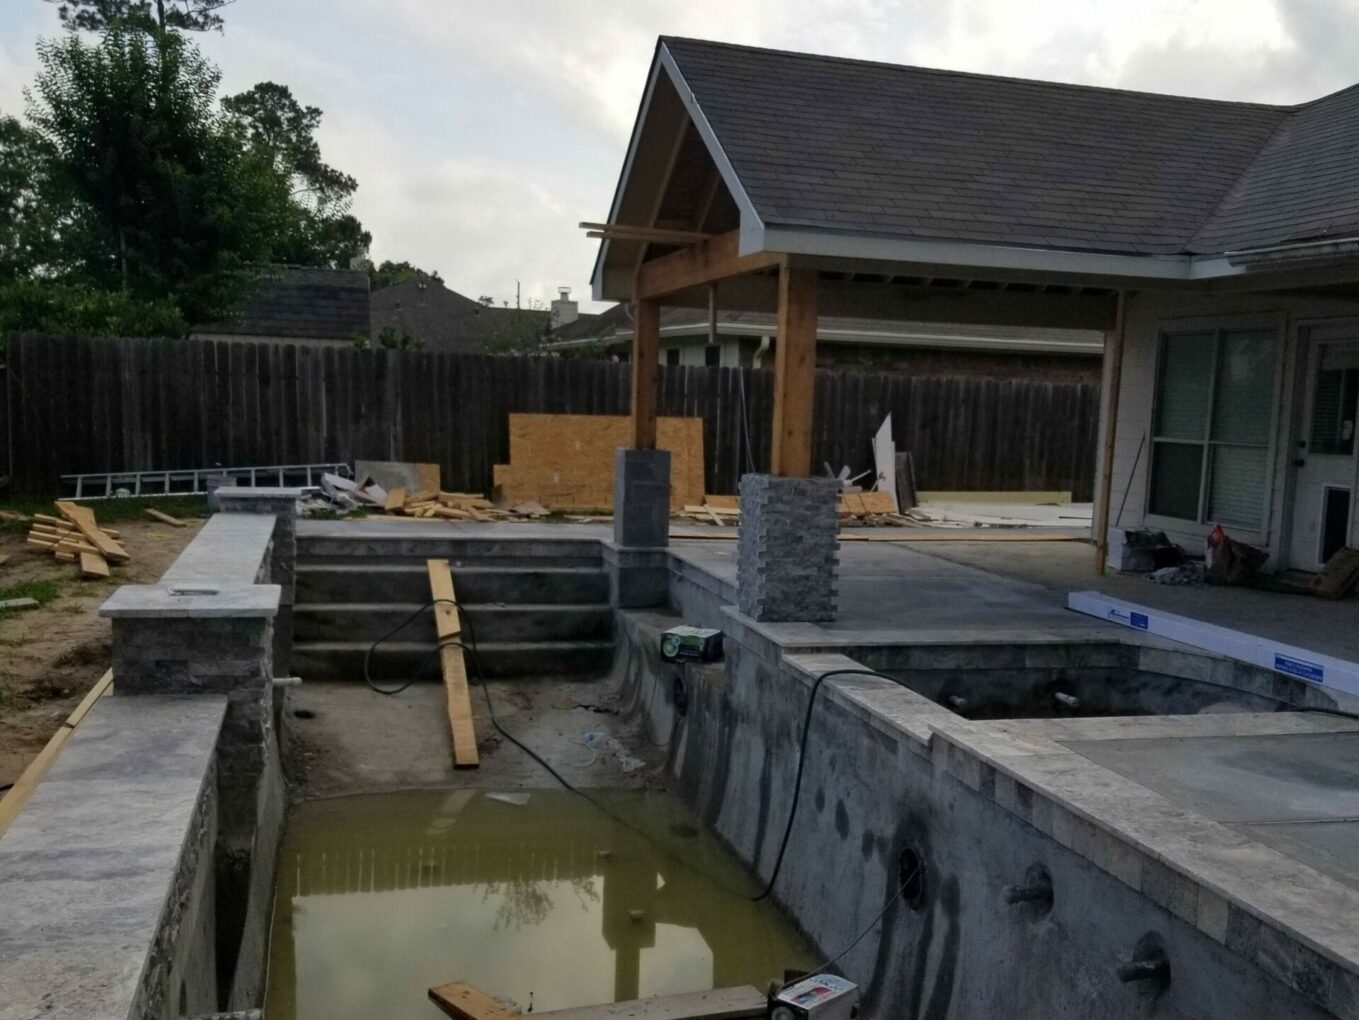 A pool that is being built in the yard.